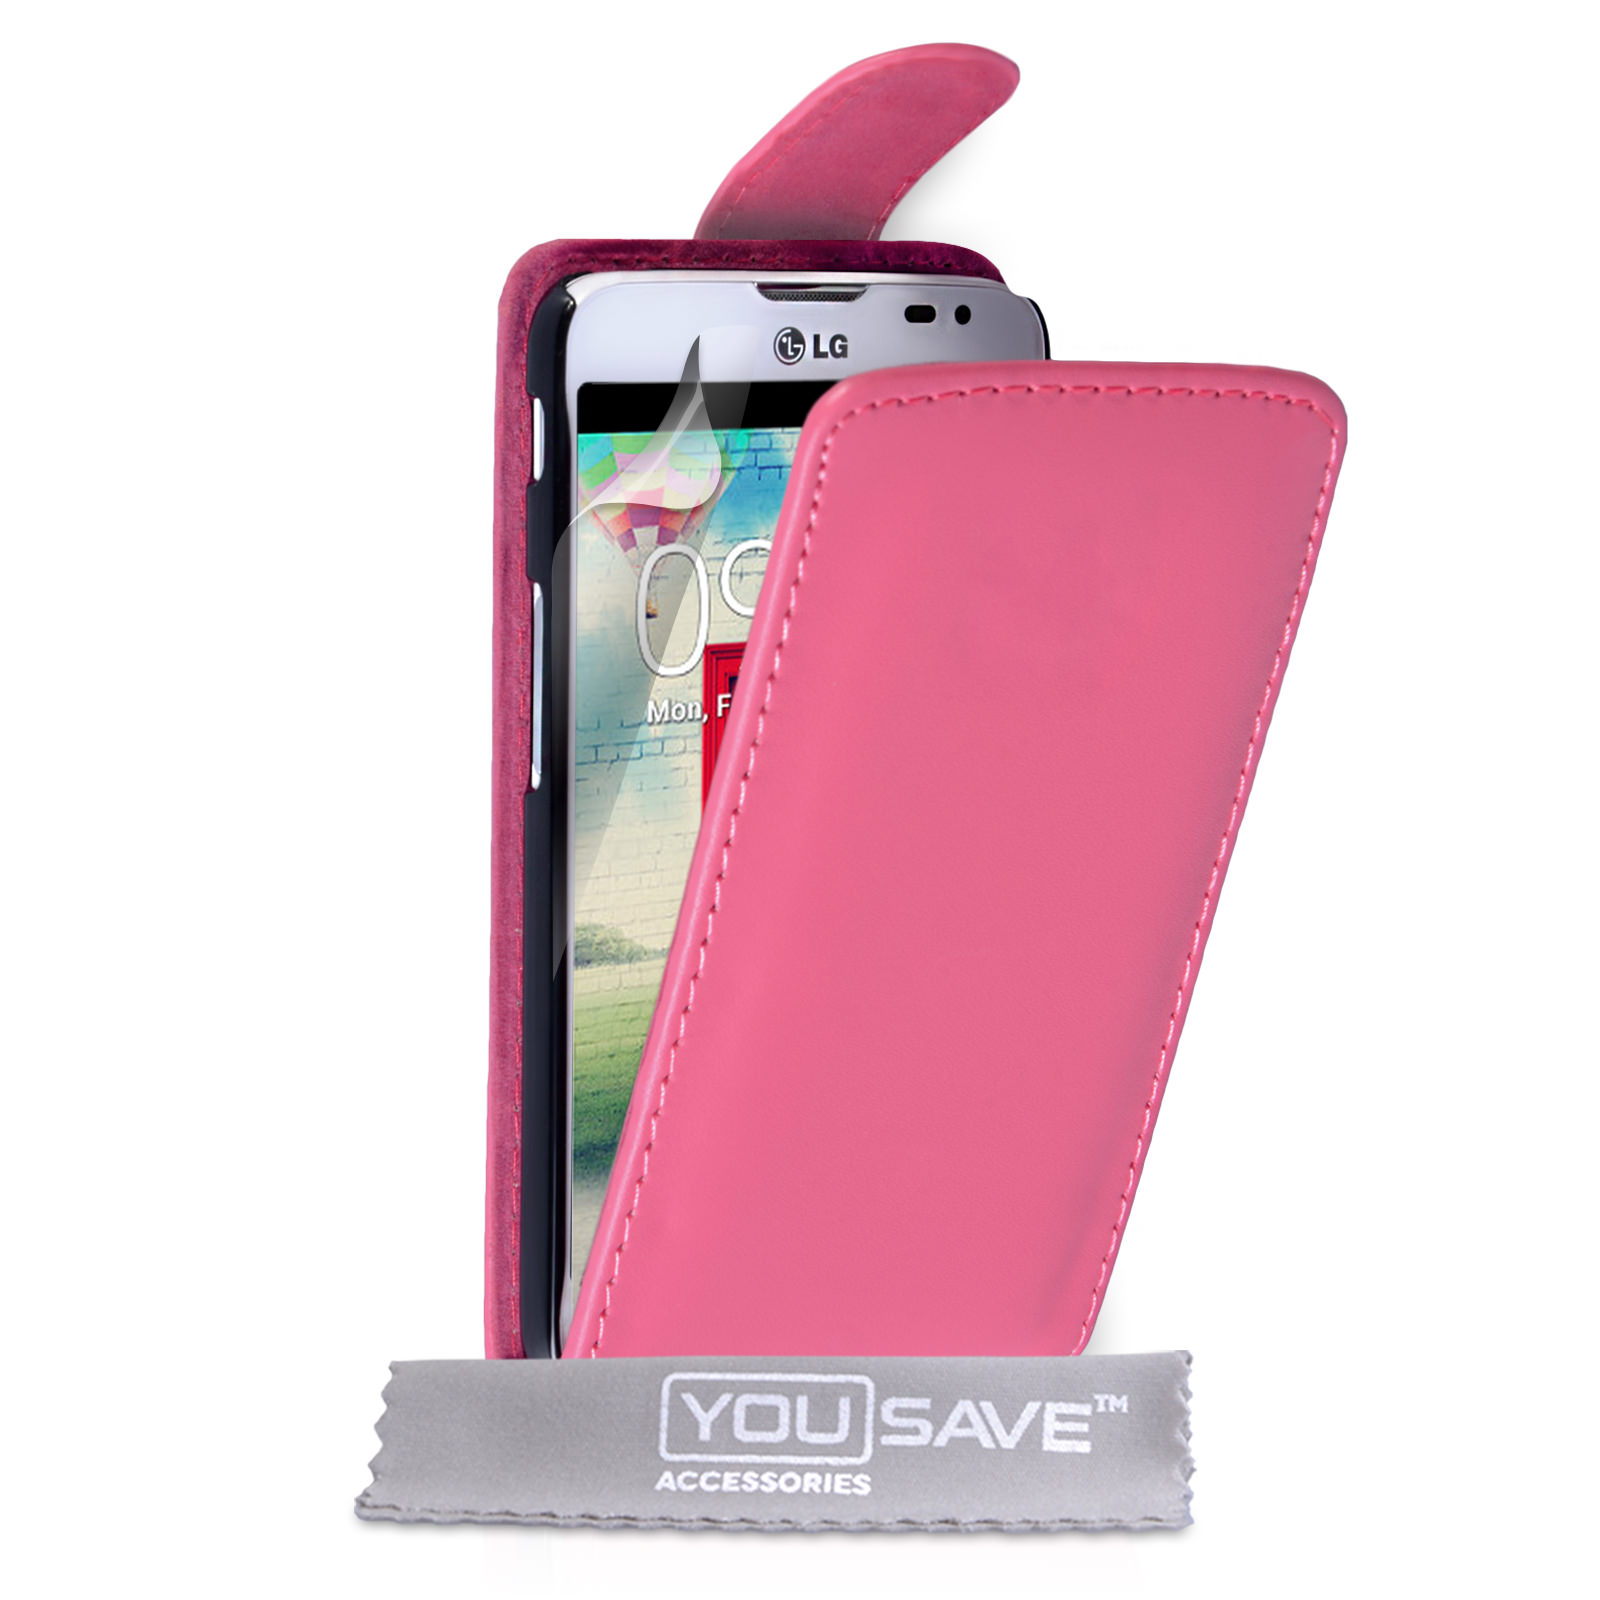 YouSave Accessories LG L90 Leather-Effect Flip Case - Hot Pink